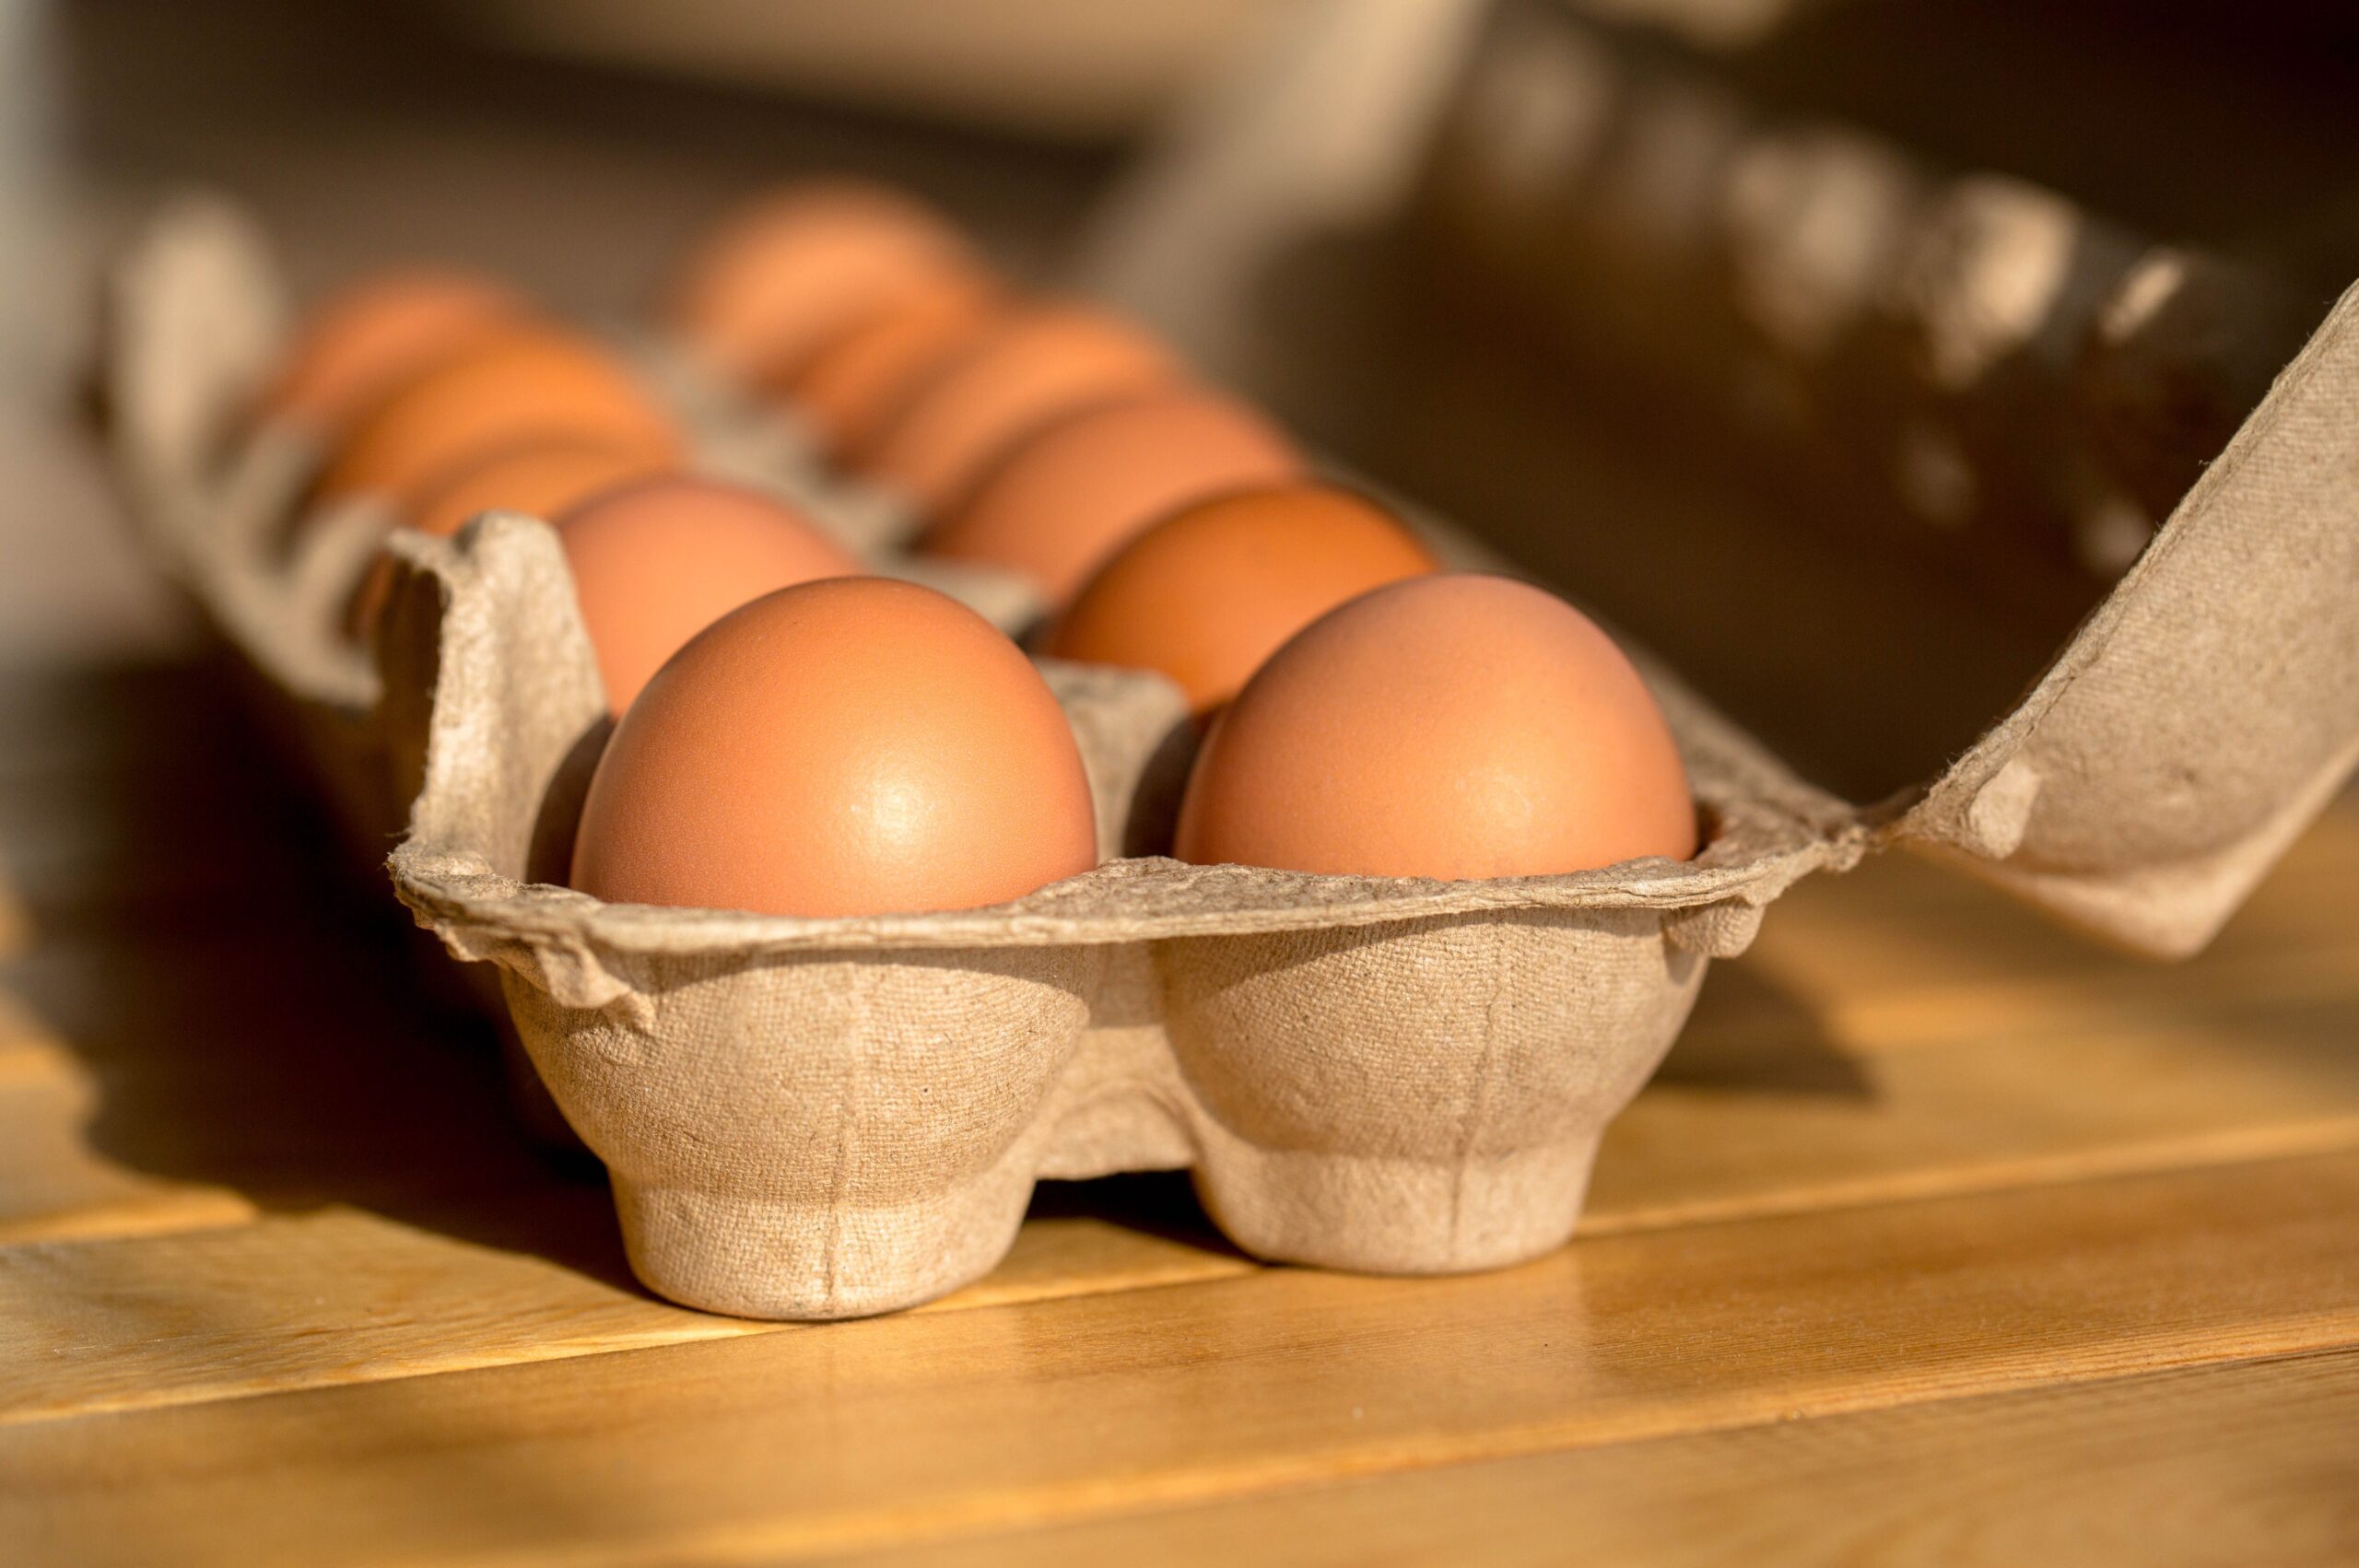 Egg prices are on the rise. The average price of a dozen Grade A large eggs was $3 in February, acc...